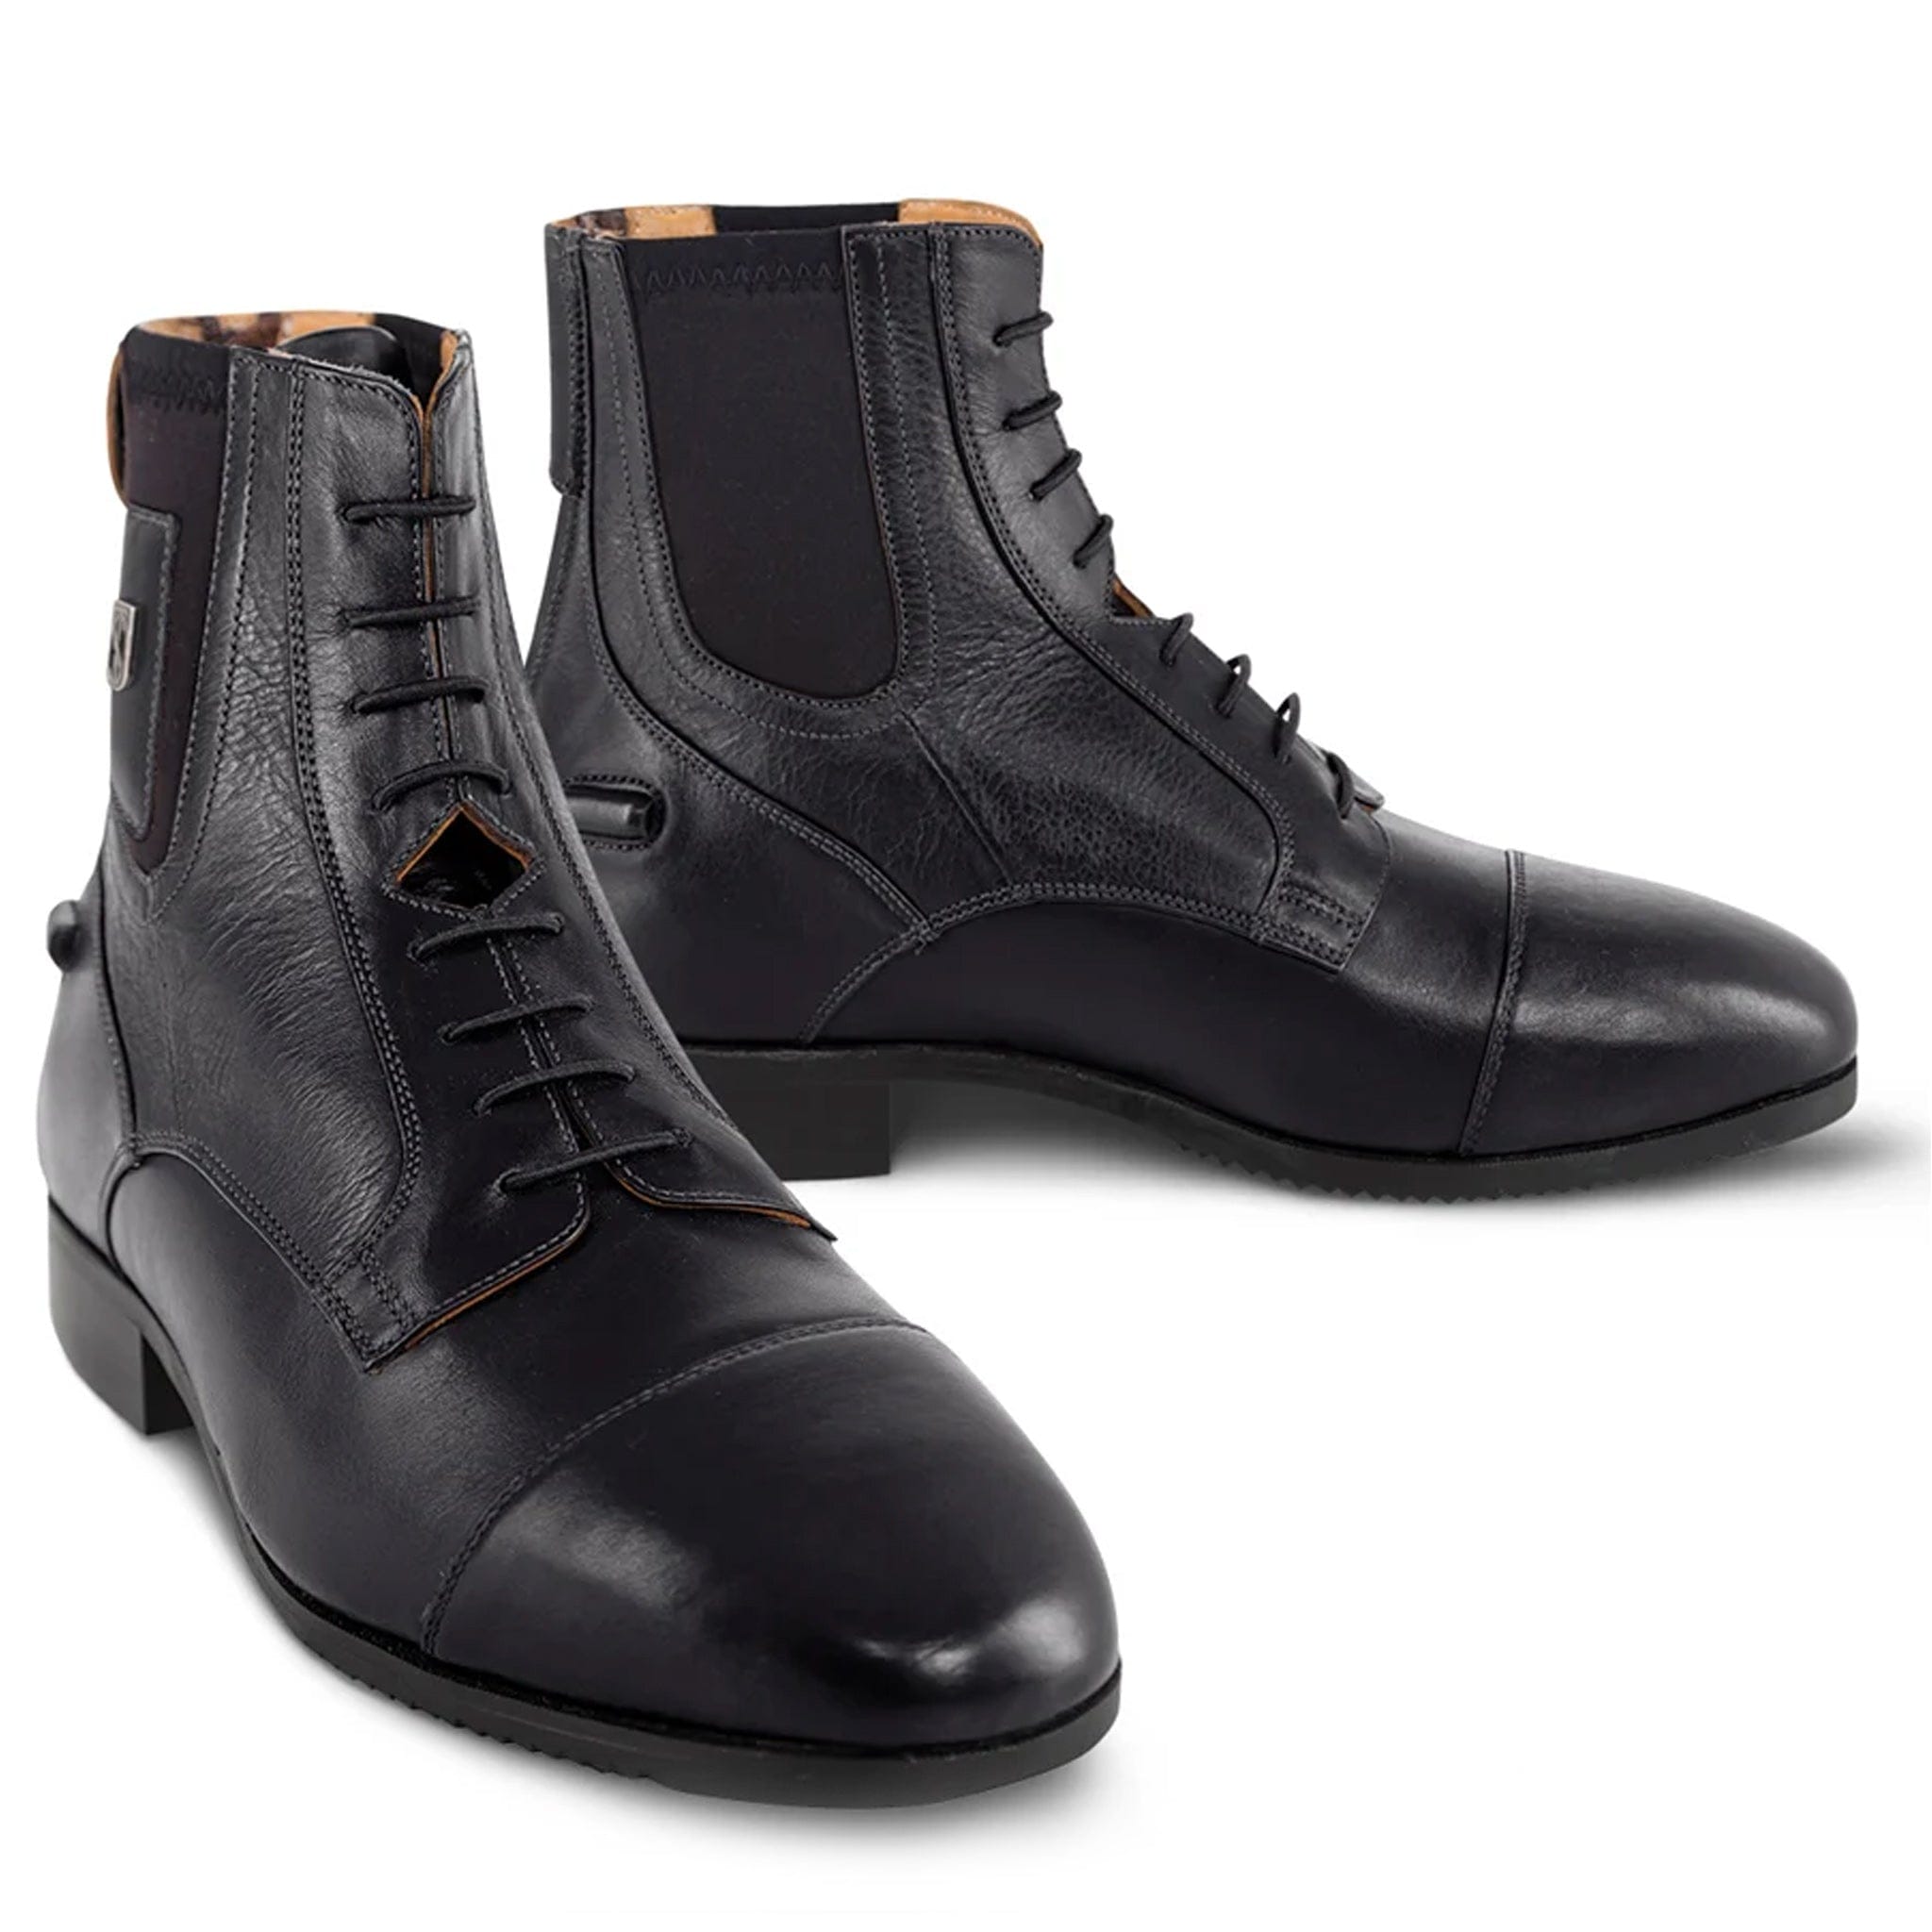 Tredstep Medici II Paddock Boots with Lace and Rear Zip Black M2L42B